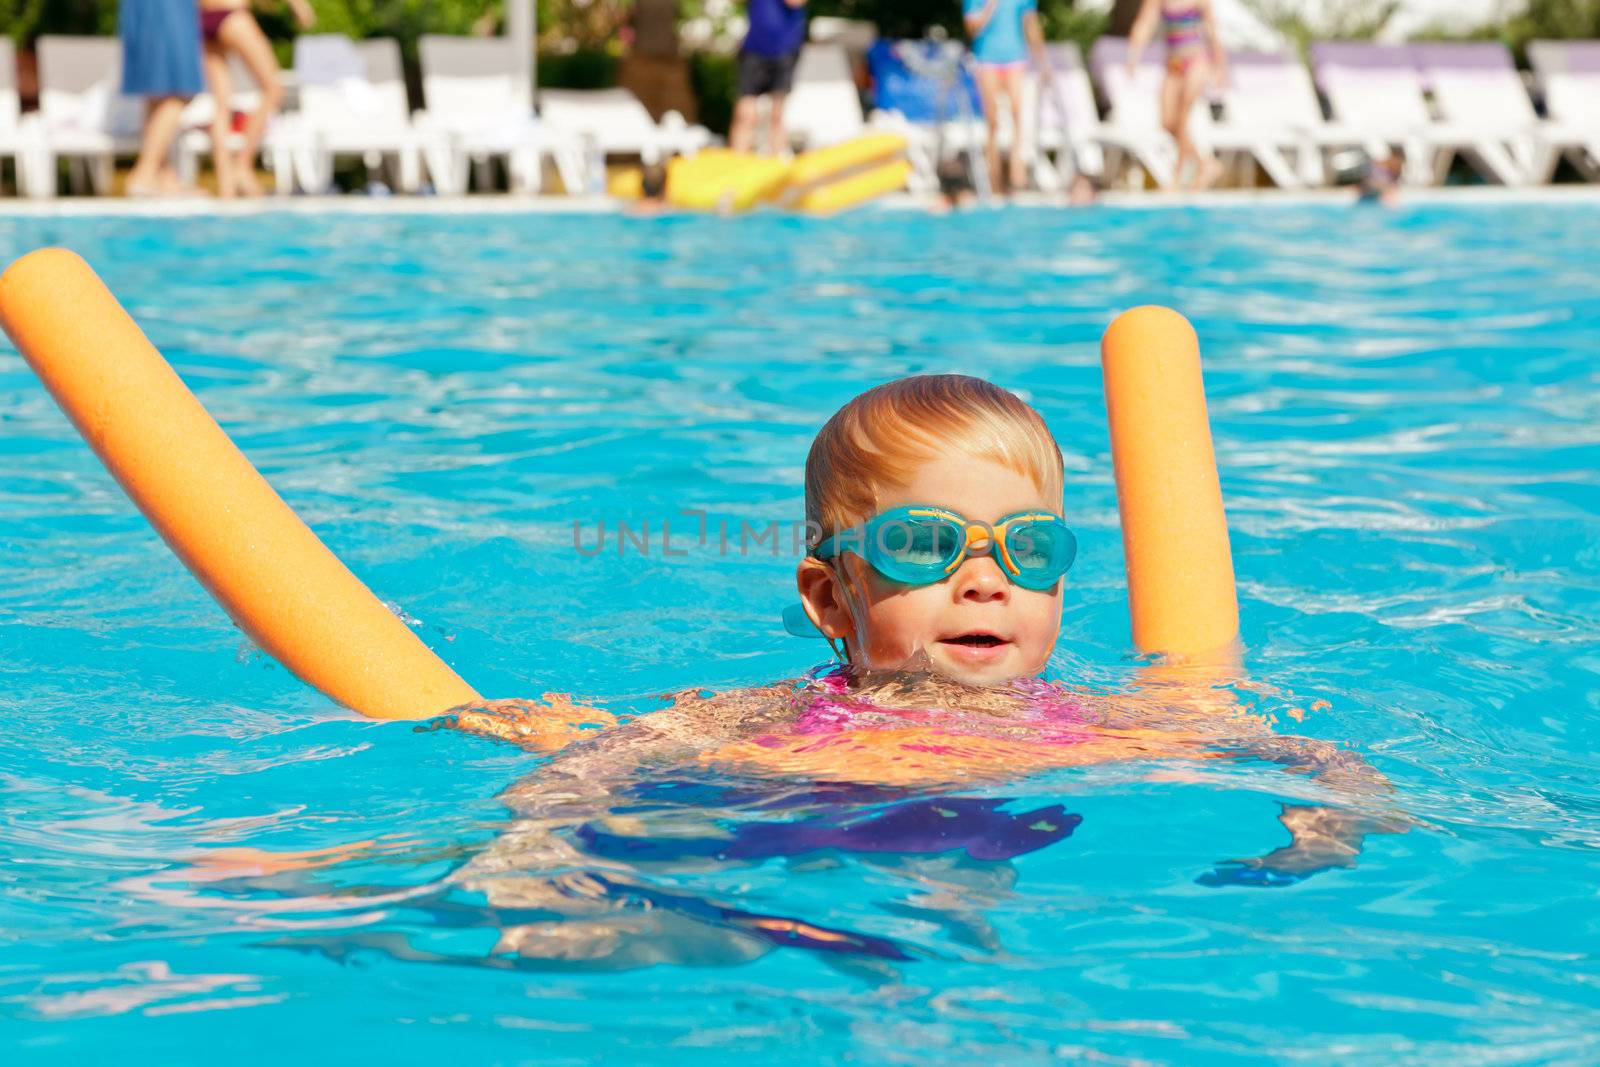 Child in a swimming pool by naumoid